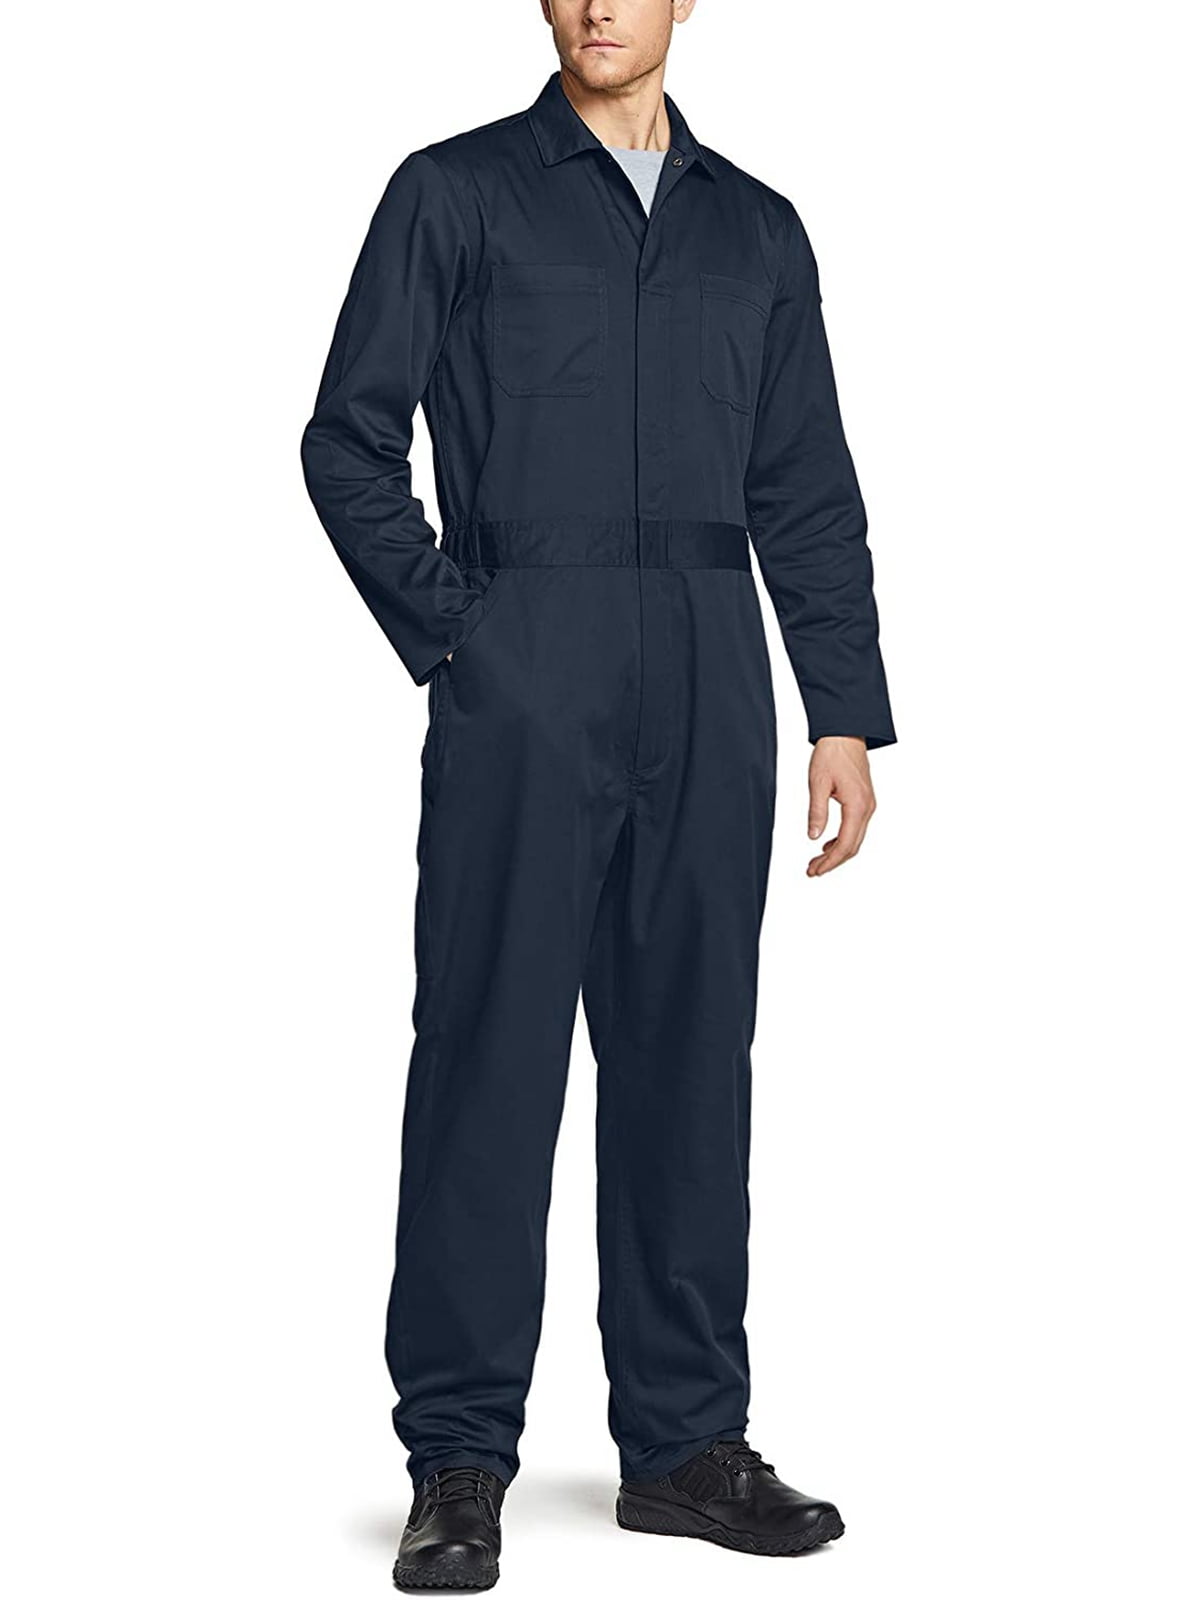 Twill Stain & Wrinkle Resistant Work Coverall CQR Men's Long Sleeve Zip-Front Coverall Action Back Jumpsuit with Multi Pockets 